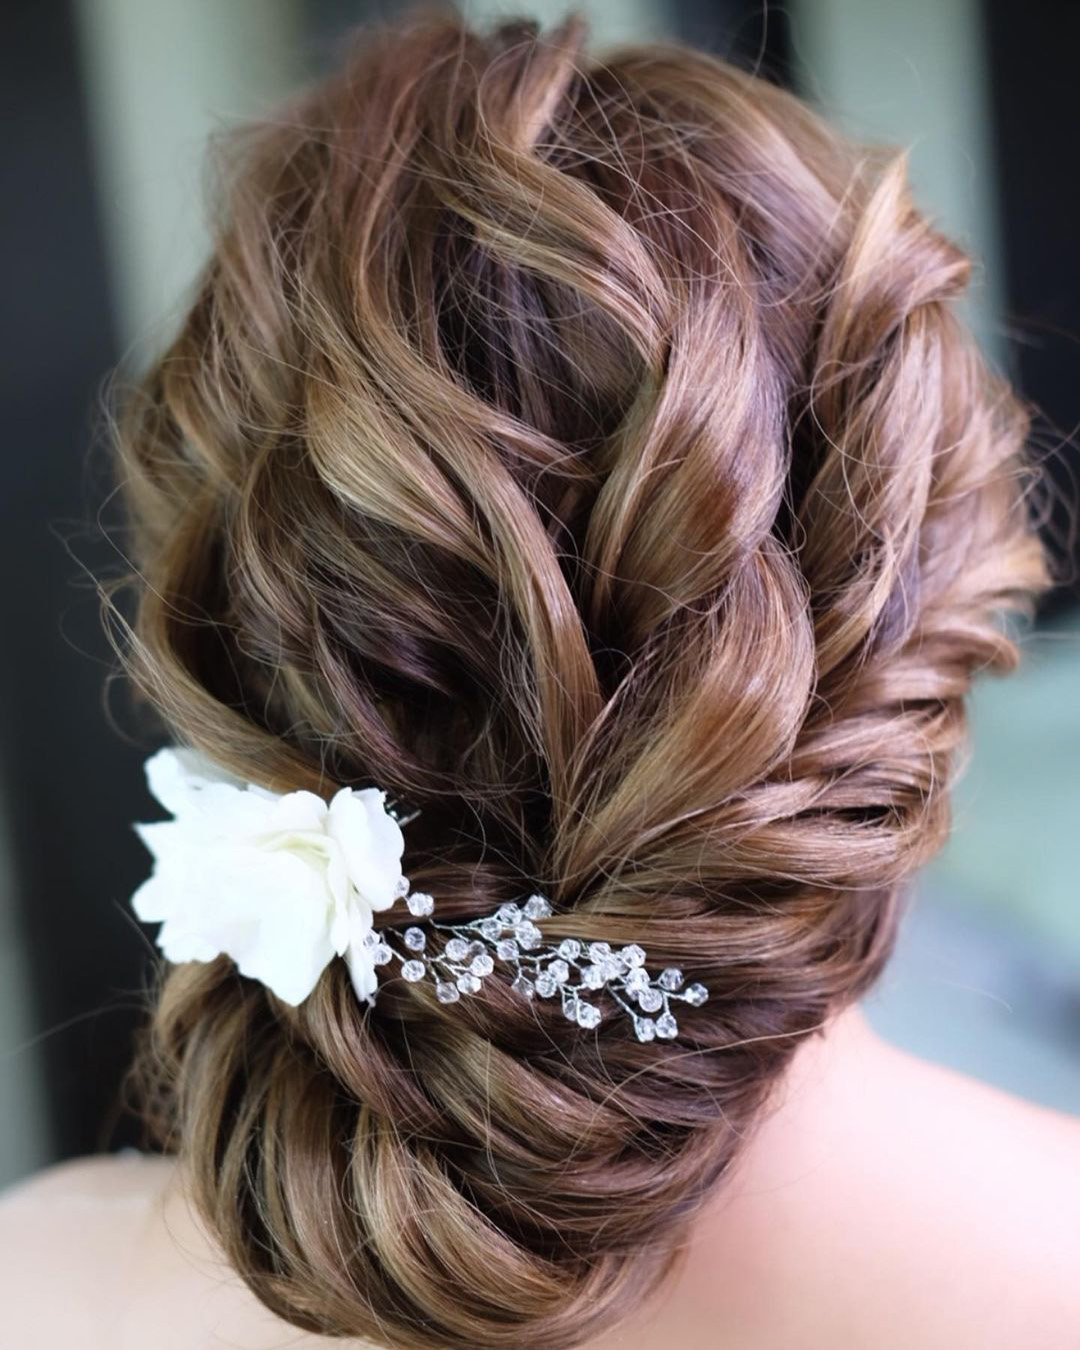 bridal hair pins low bun with white side flowers atenikks